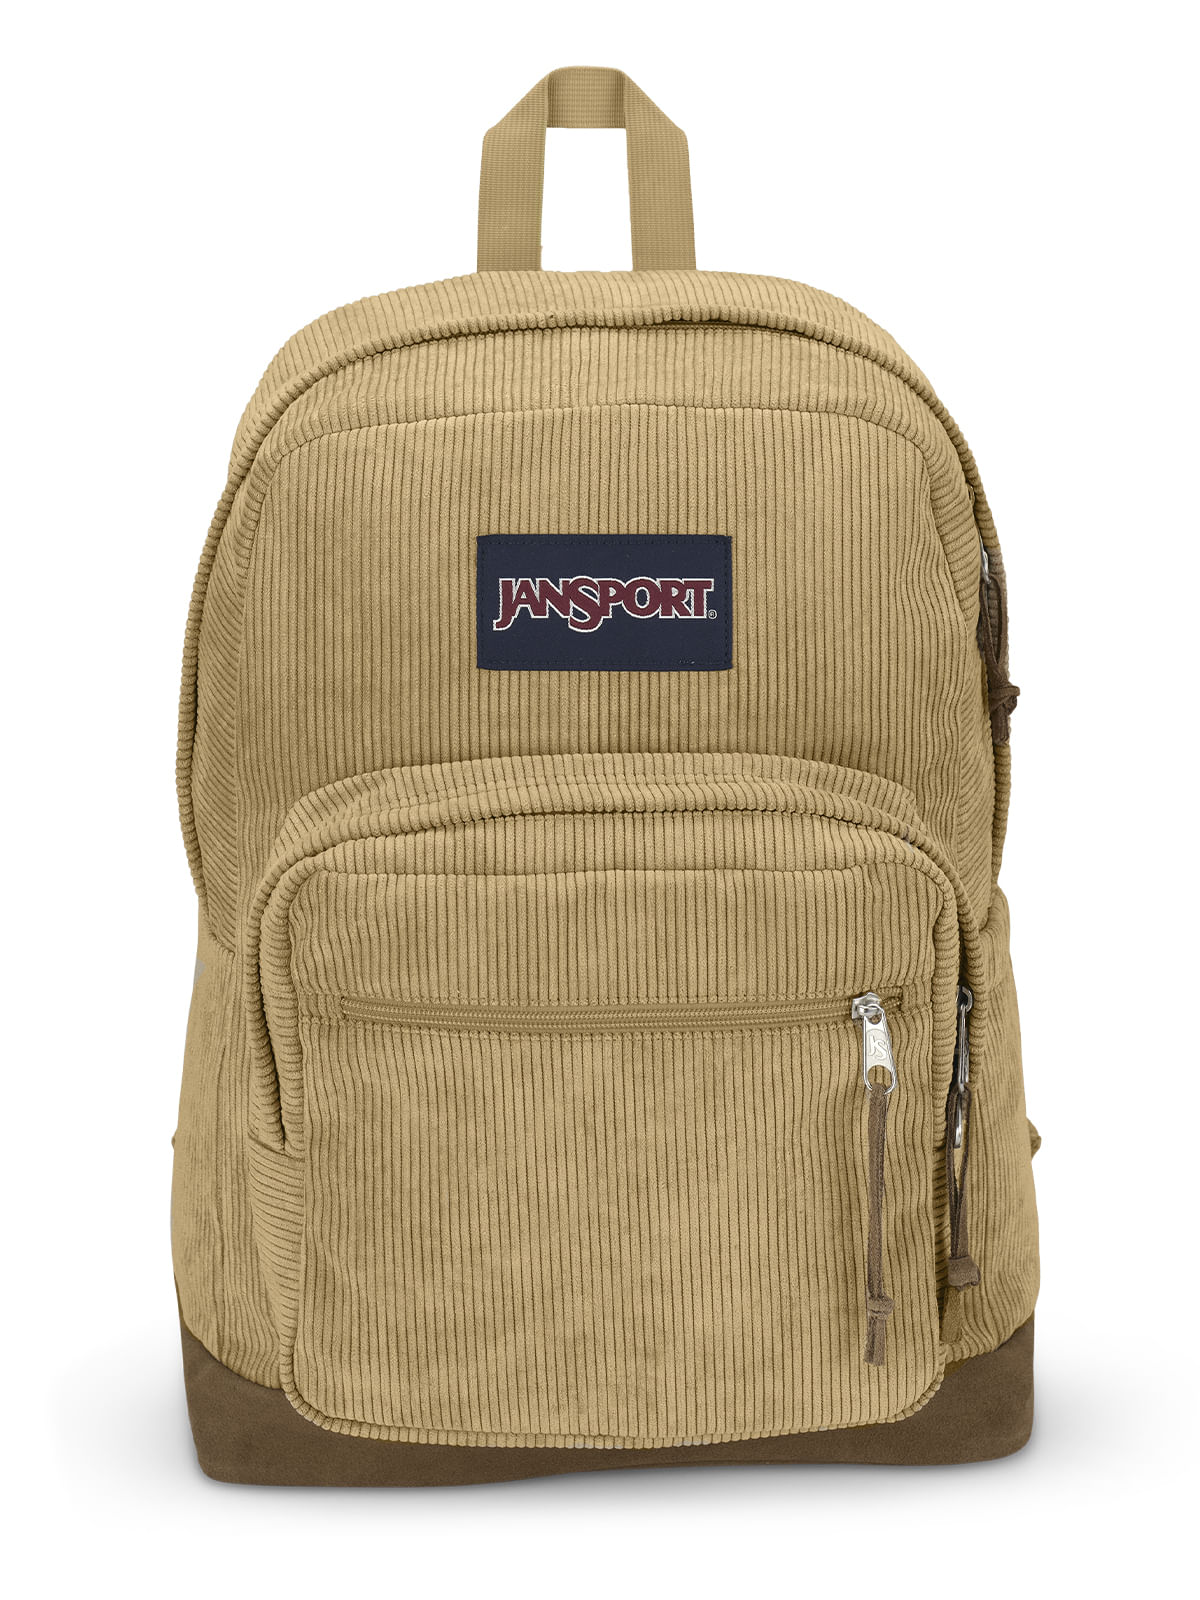 MOCHILA JANSPORT RIGHT PACK EXPRESSIONS AMARILLO